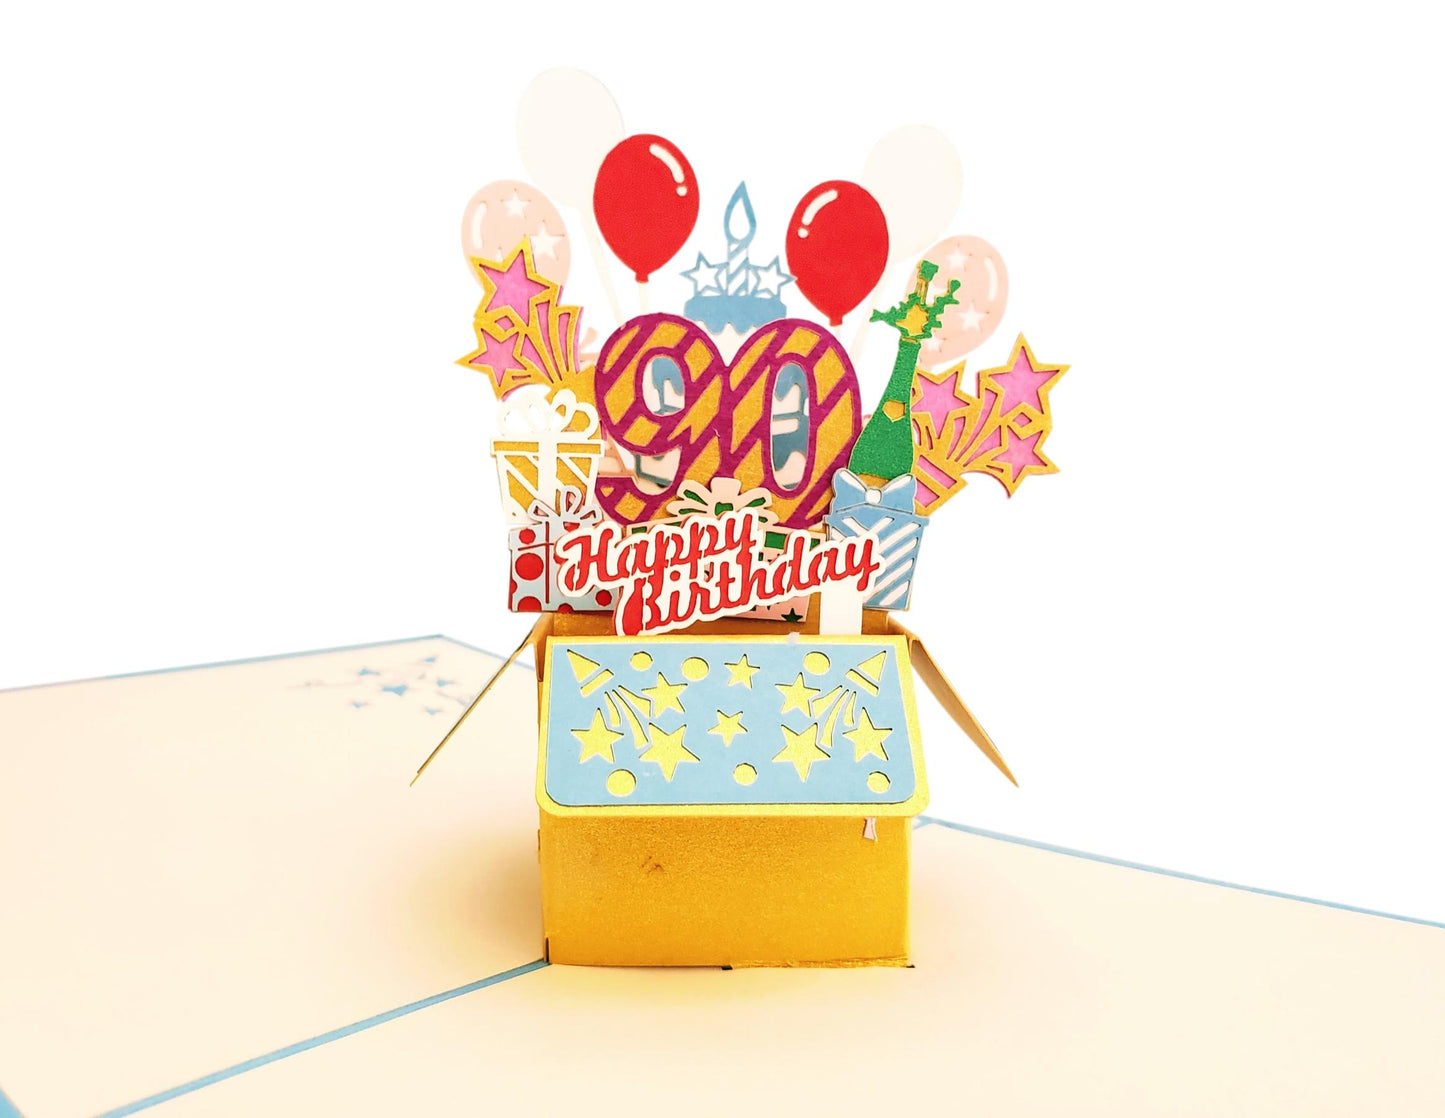 Happy 90th Birthday Blue Party Box 3D Pop Up Greeting Card - Age - Birthday - Fun - Special Days - iGifts And Cards